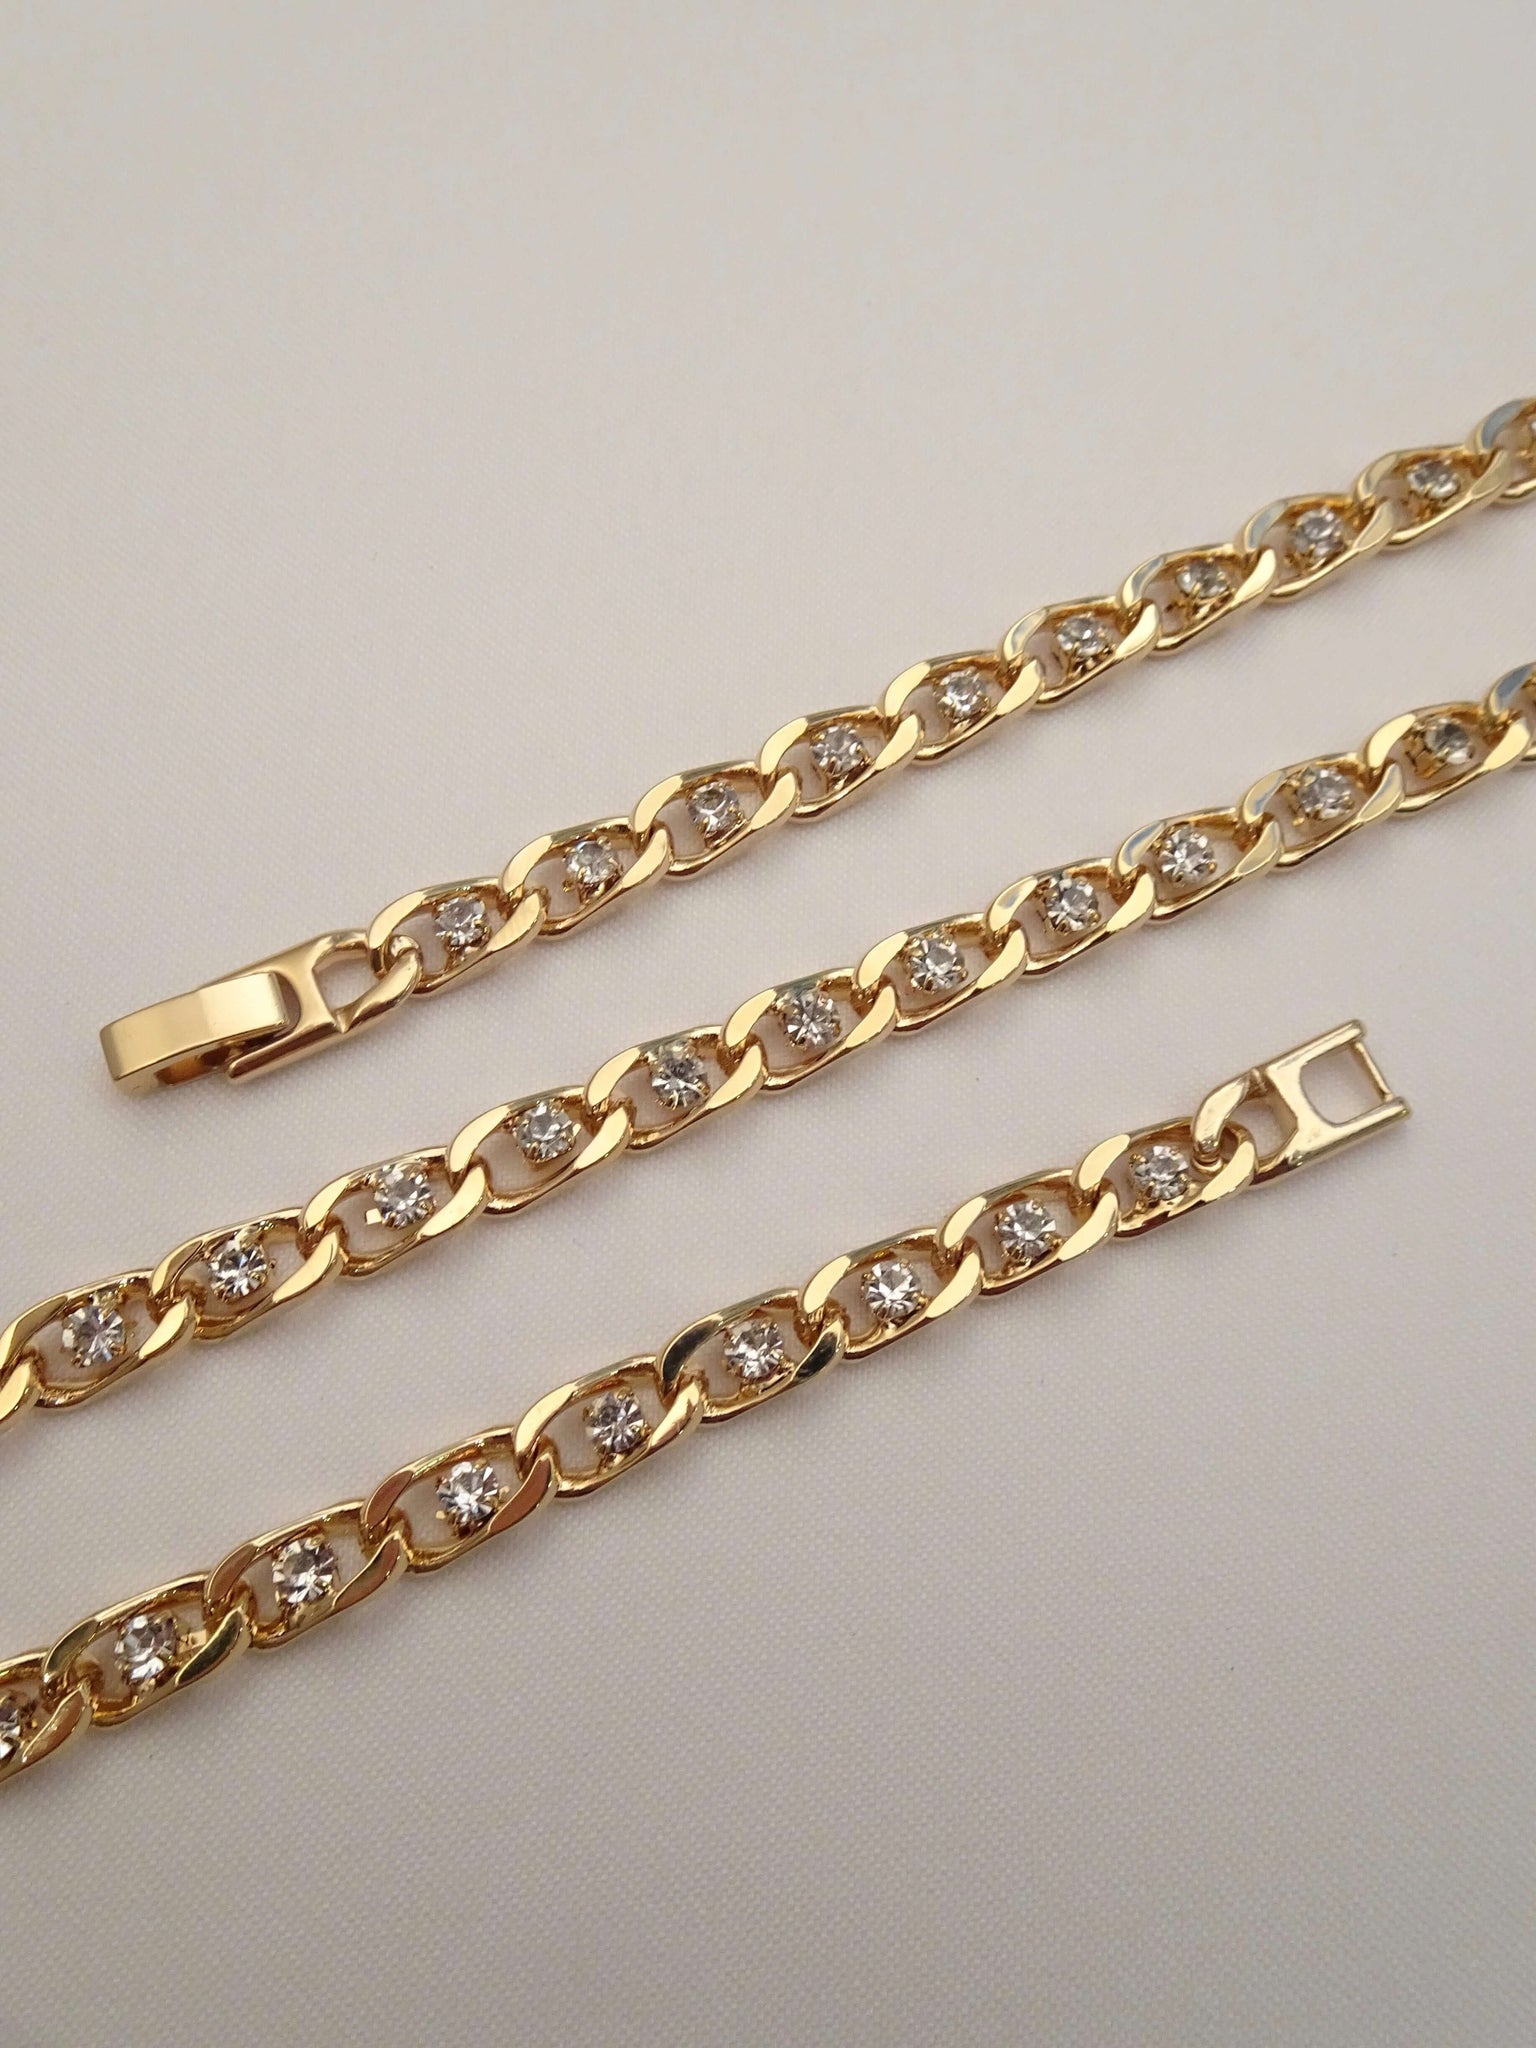 The Uptown Diamond Chain Necklace | SPARROW